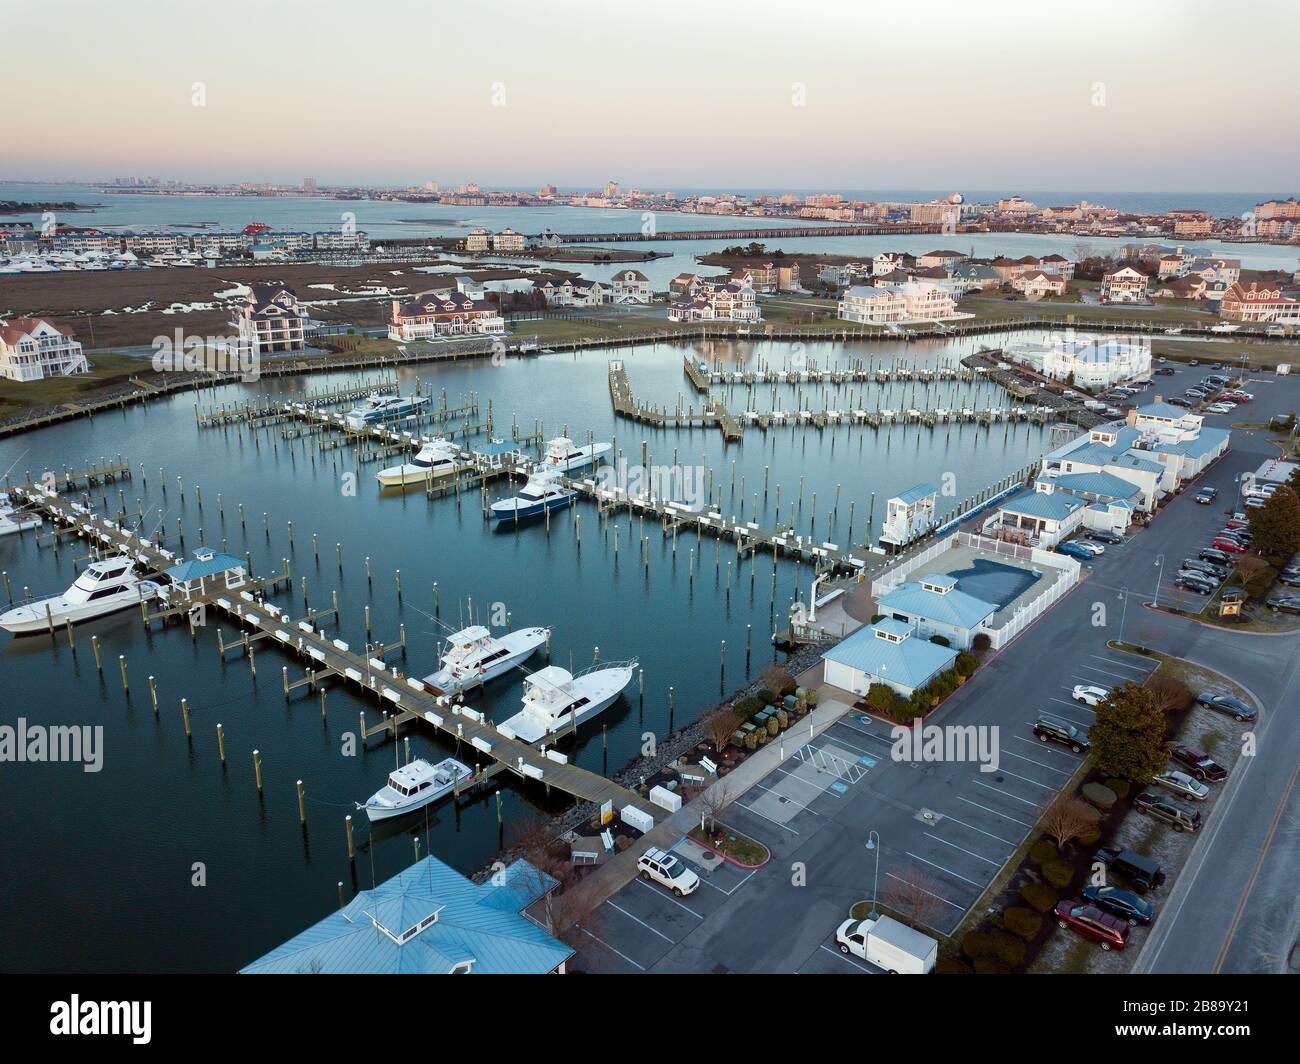 Aerial view of a commercial fishing marina in Ocean City, Maryland. Stock Photo